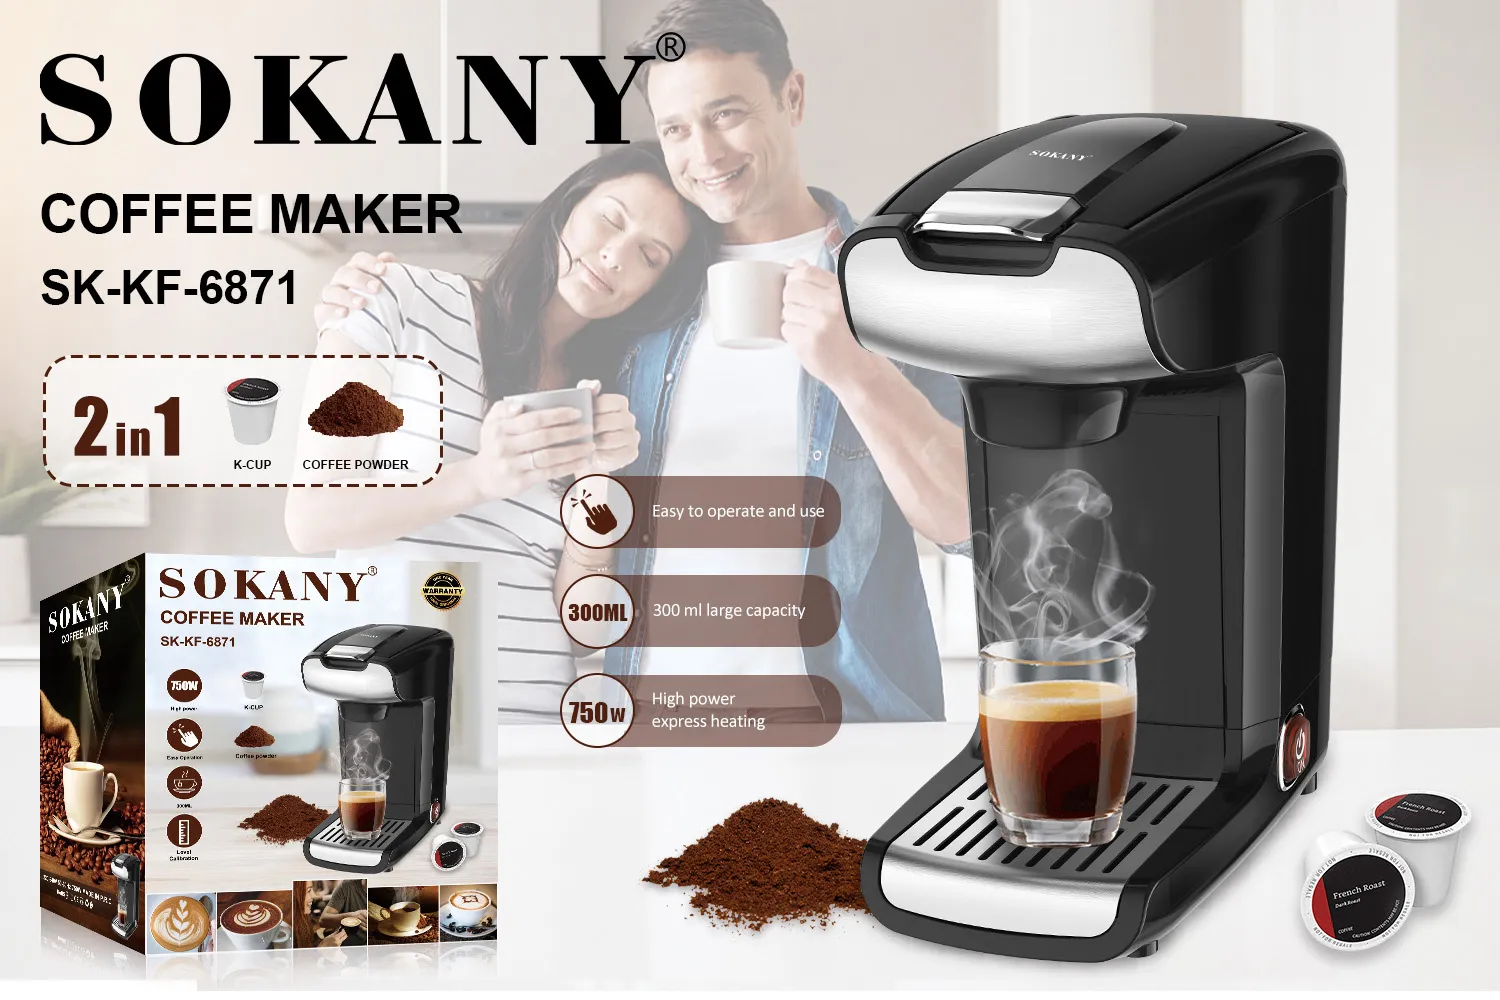 SOKANY 6871 Small Office Instant Coffee Maker With Cup 600ml Capacity From  Galaxytoys, $854.41